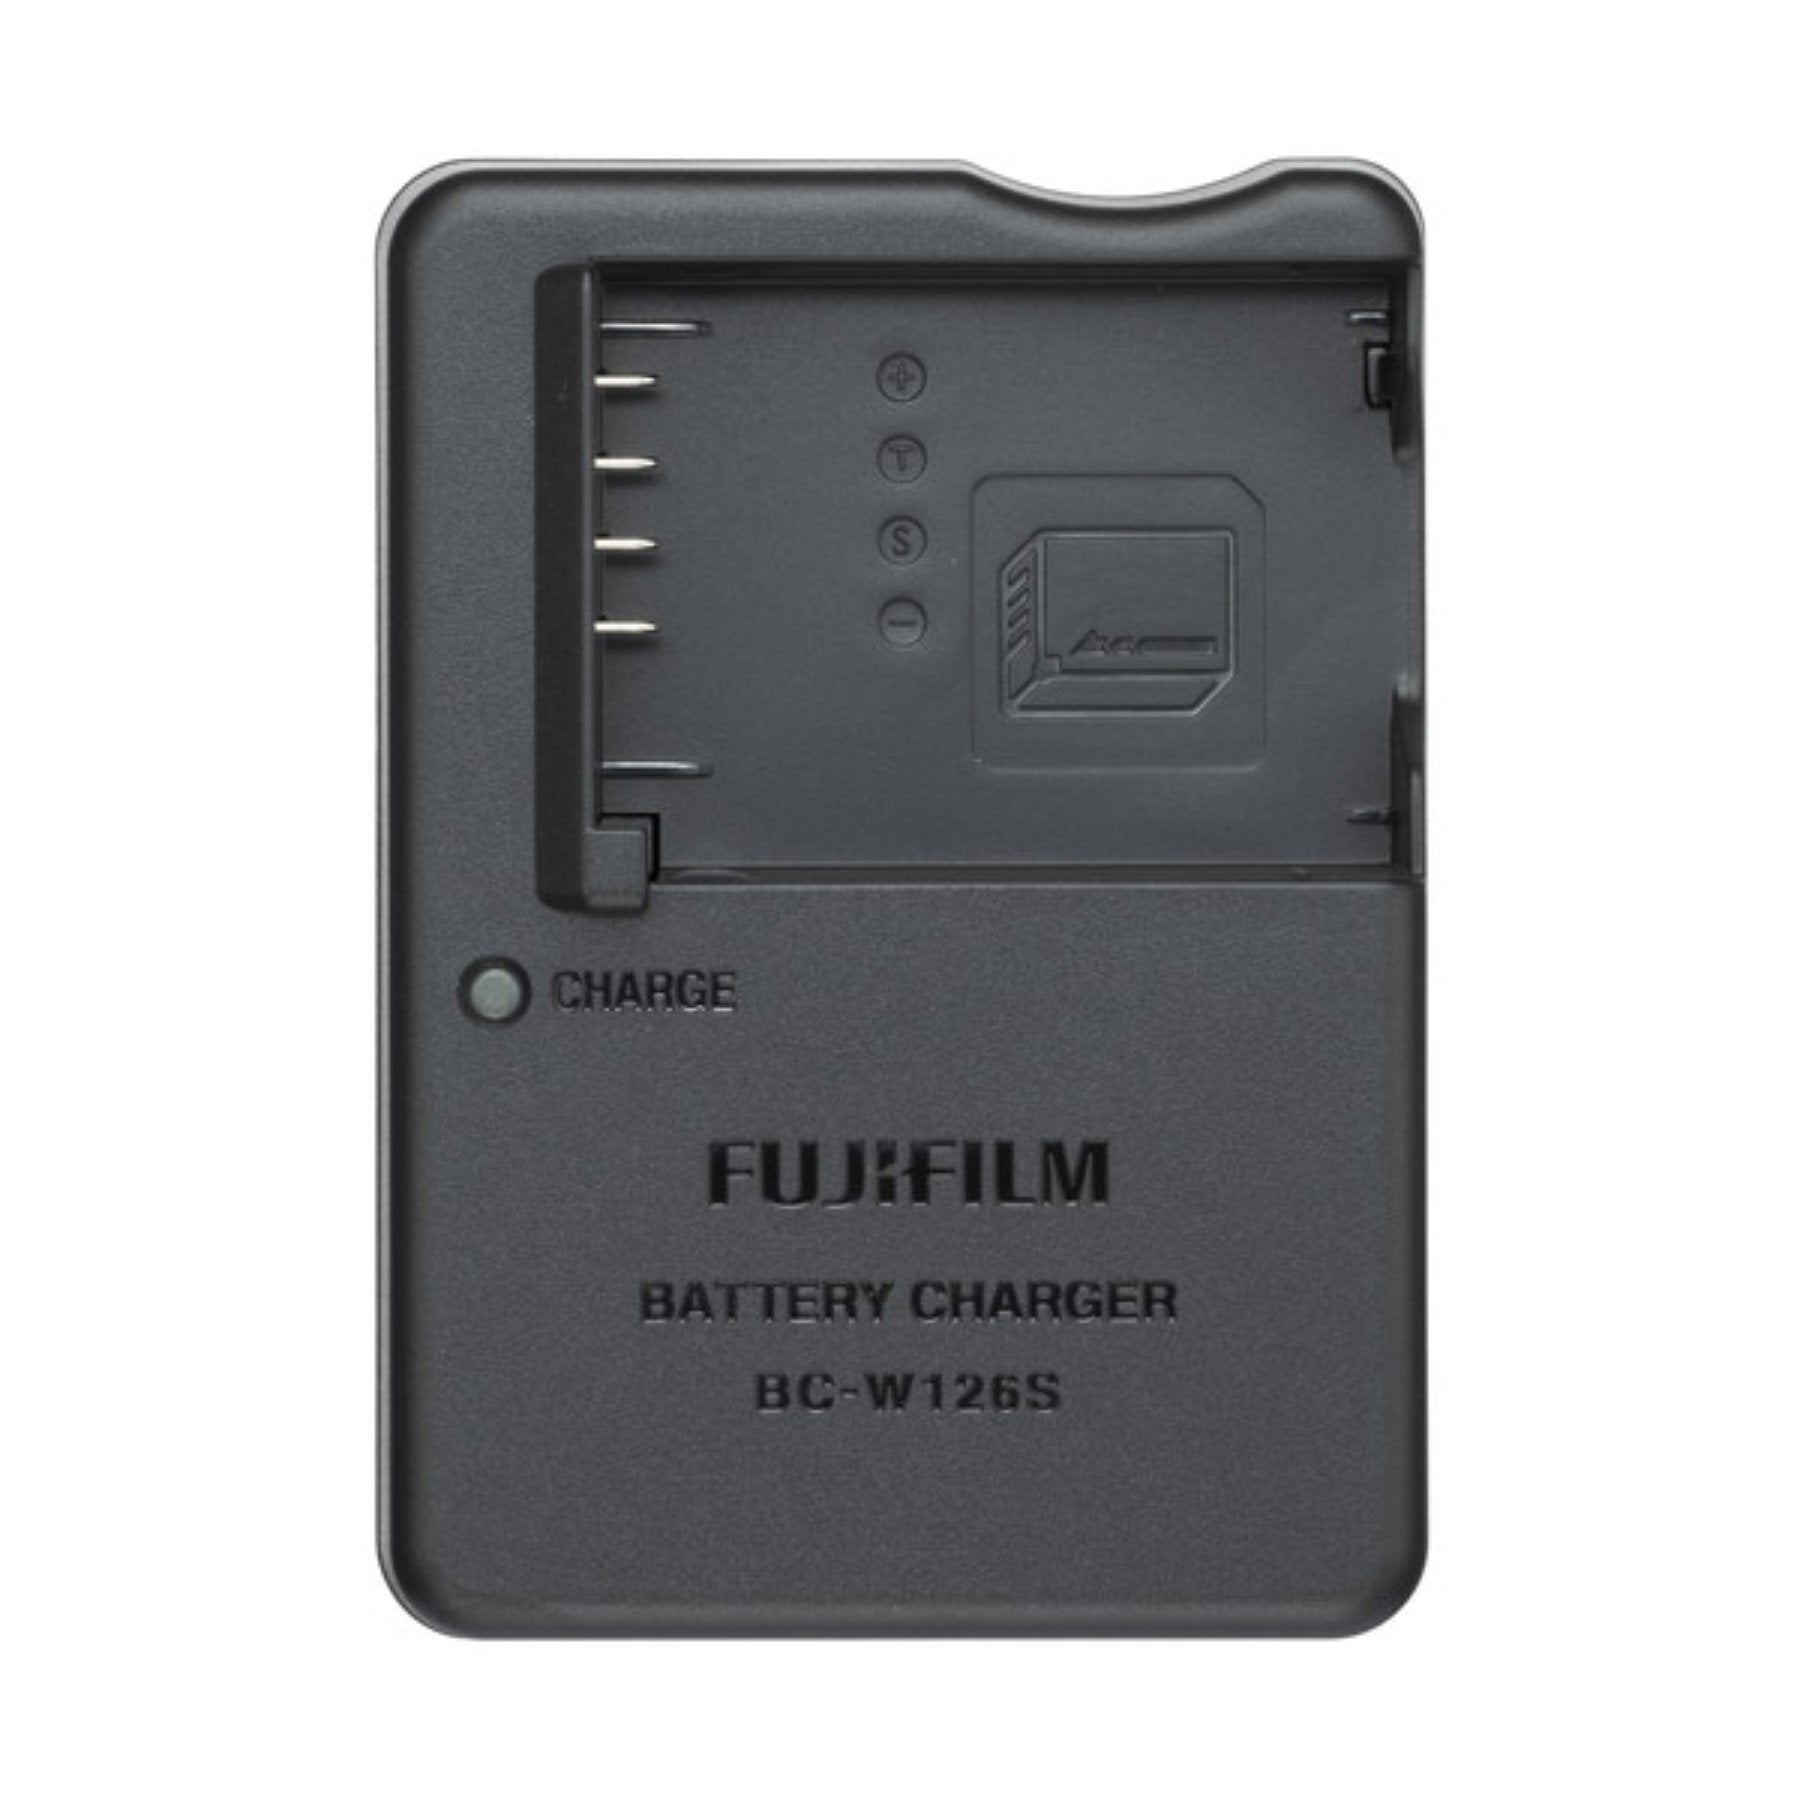 Hire Fujifilm Battery Charger BC-W126S at Topic Rentals